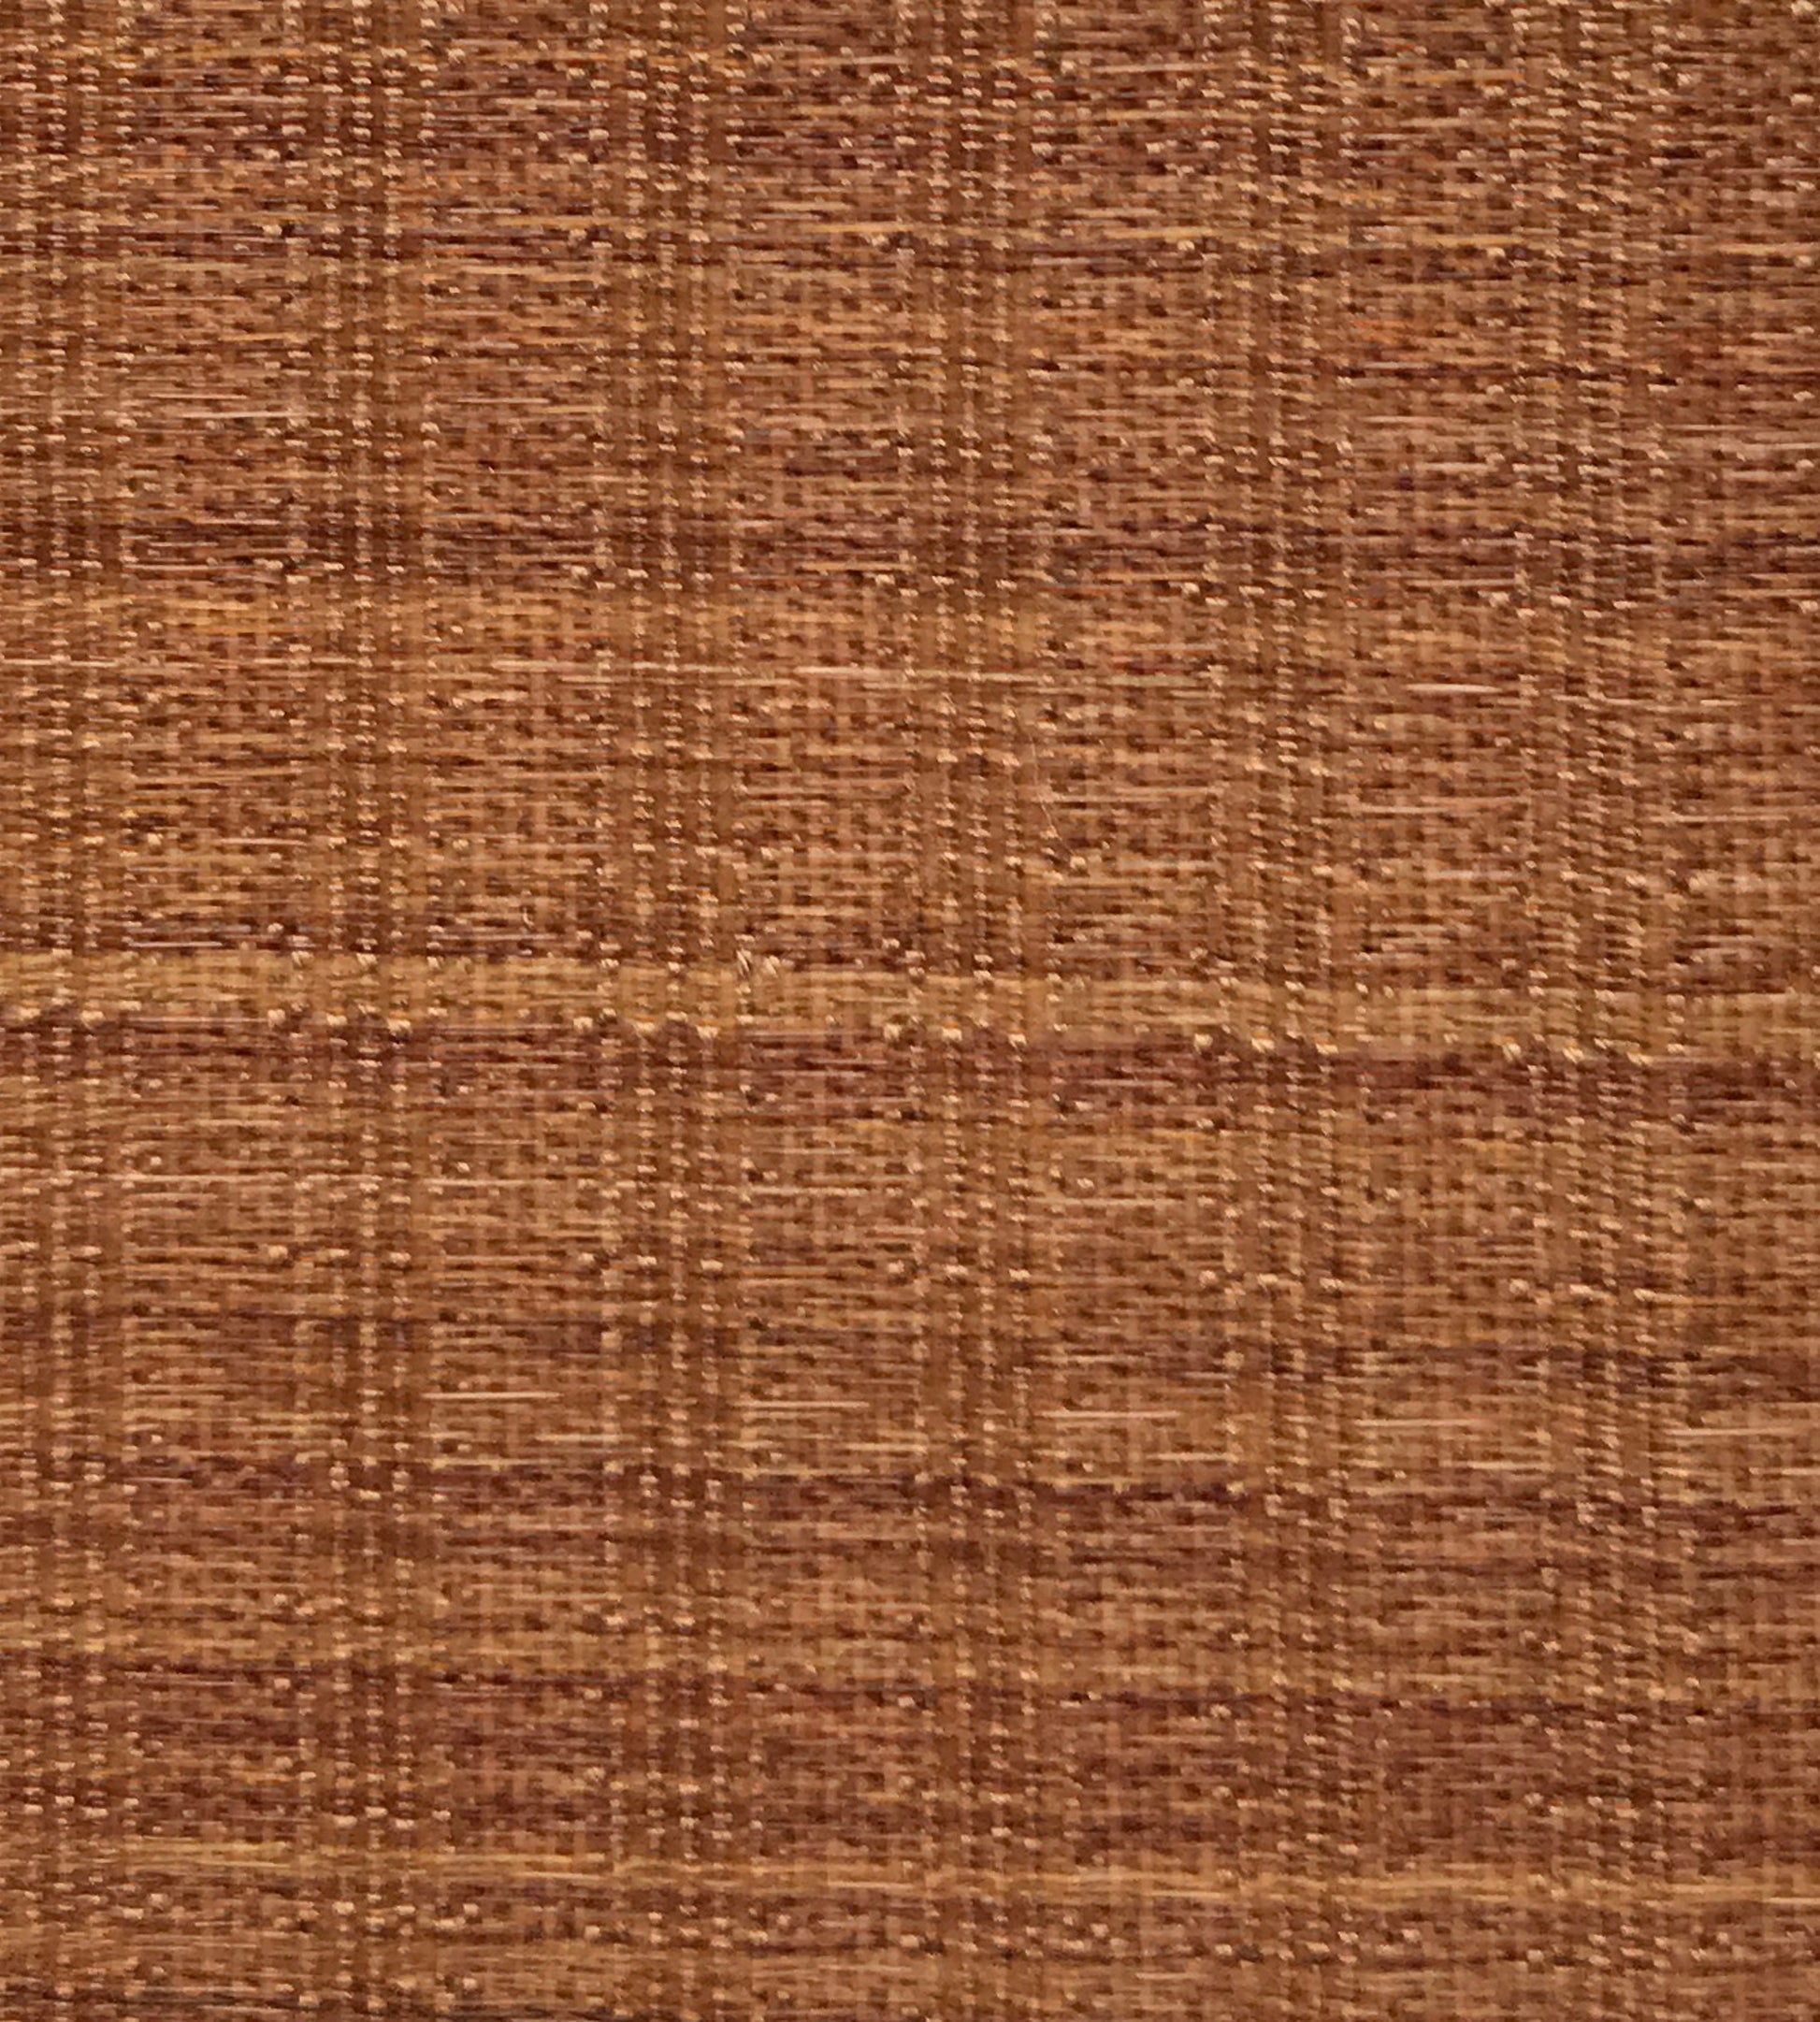 Purchase Old World Weavers Fabric Pattern number SK 00240616, Oldenburg Horsehair Brown 1